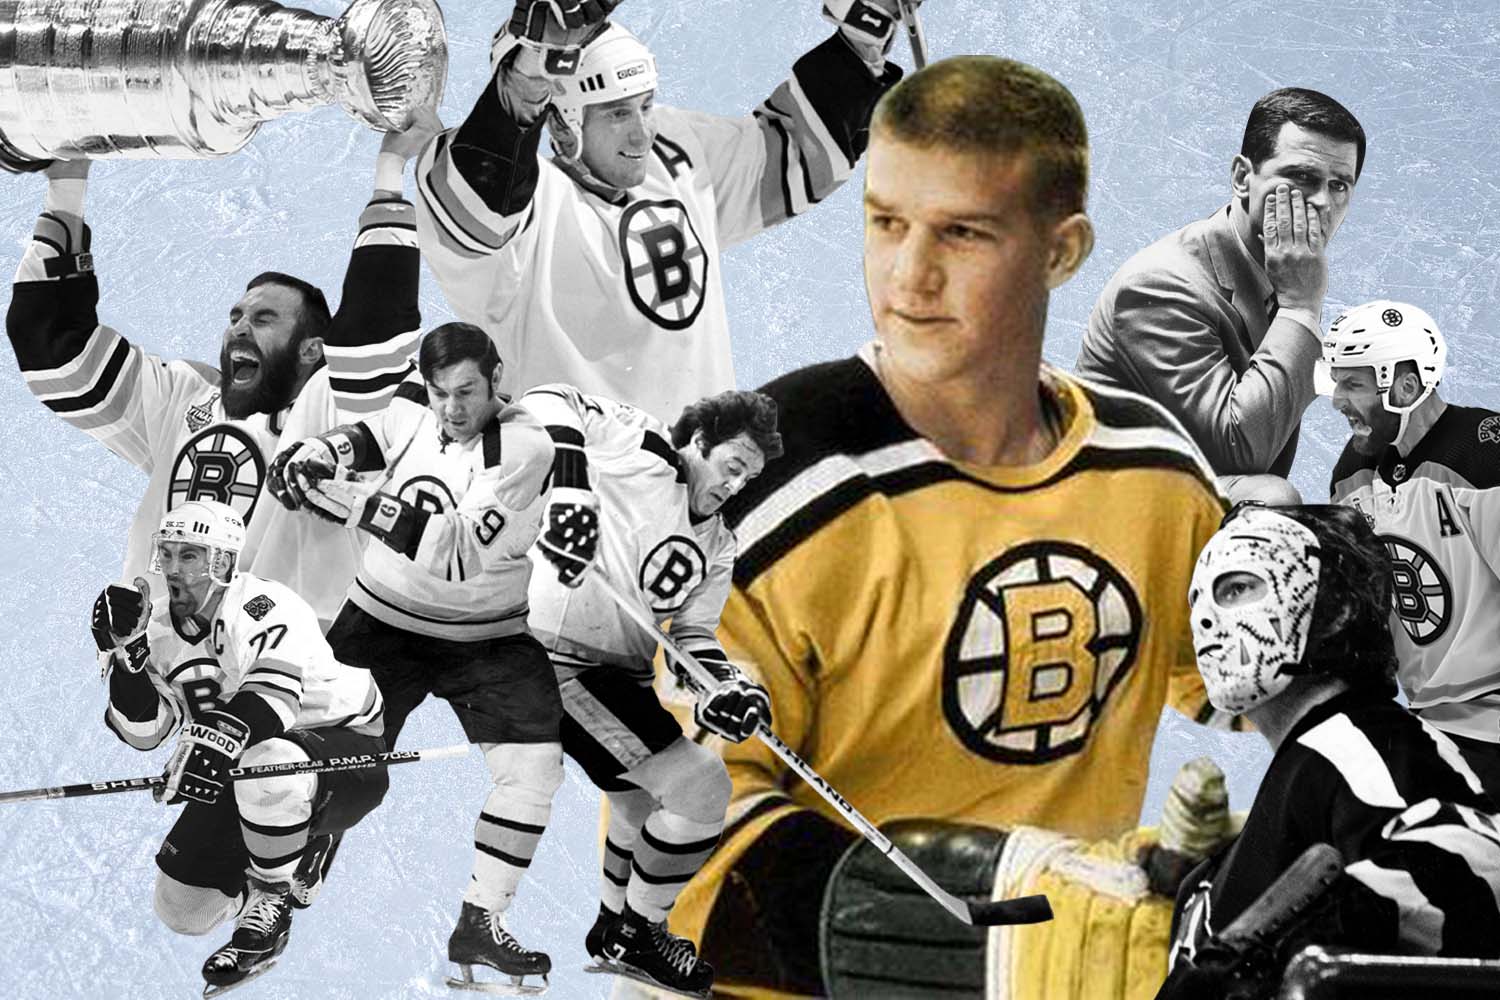 The Cam Neely Foundation - One of the best version of the Bruins